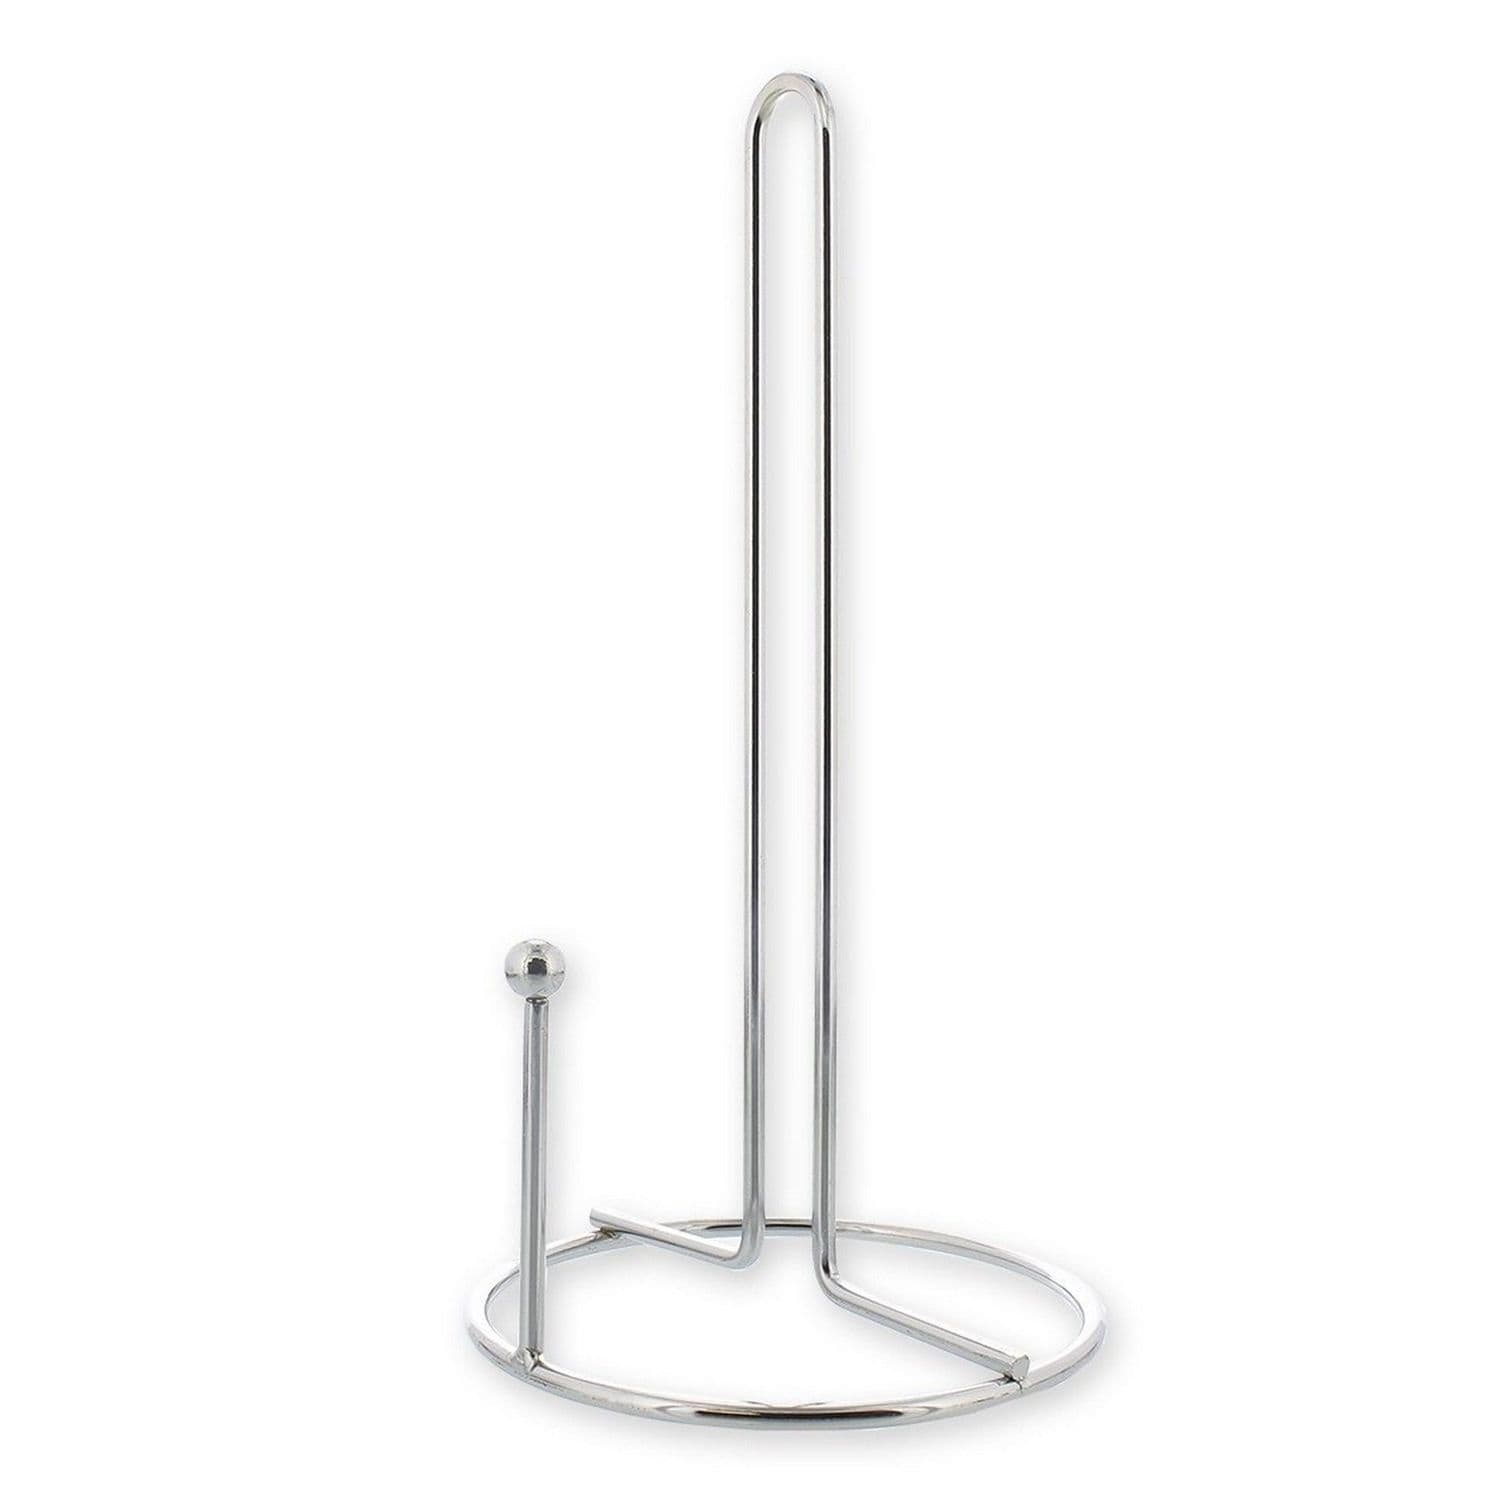 Paper Towel Holder Stainless Steel Vertical Stand for Paper Towels 5.5 x 11.5 Inches